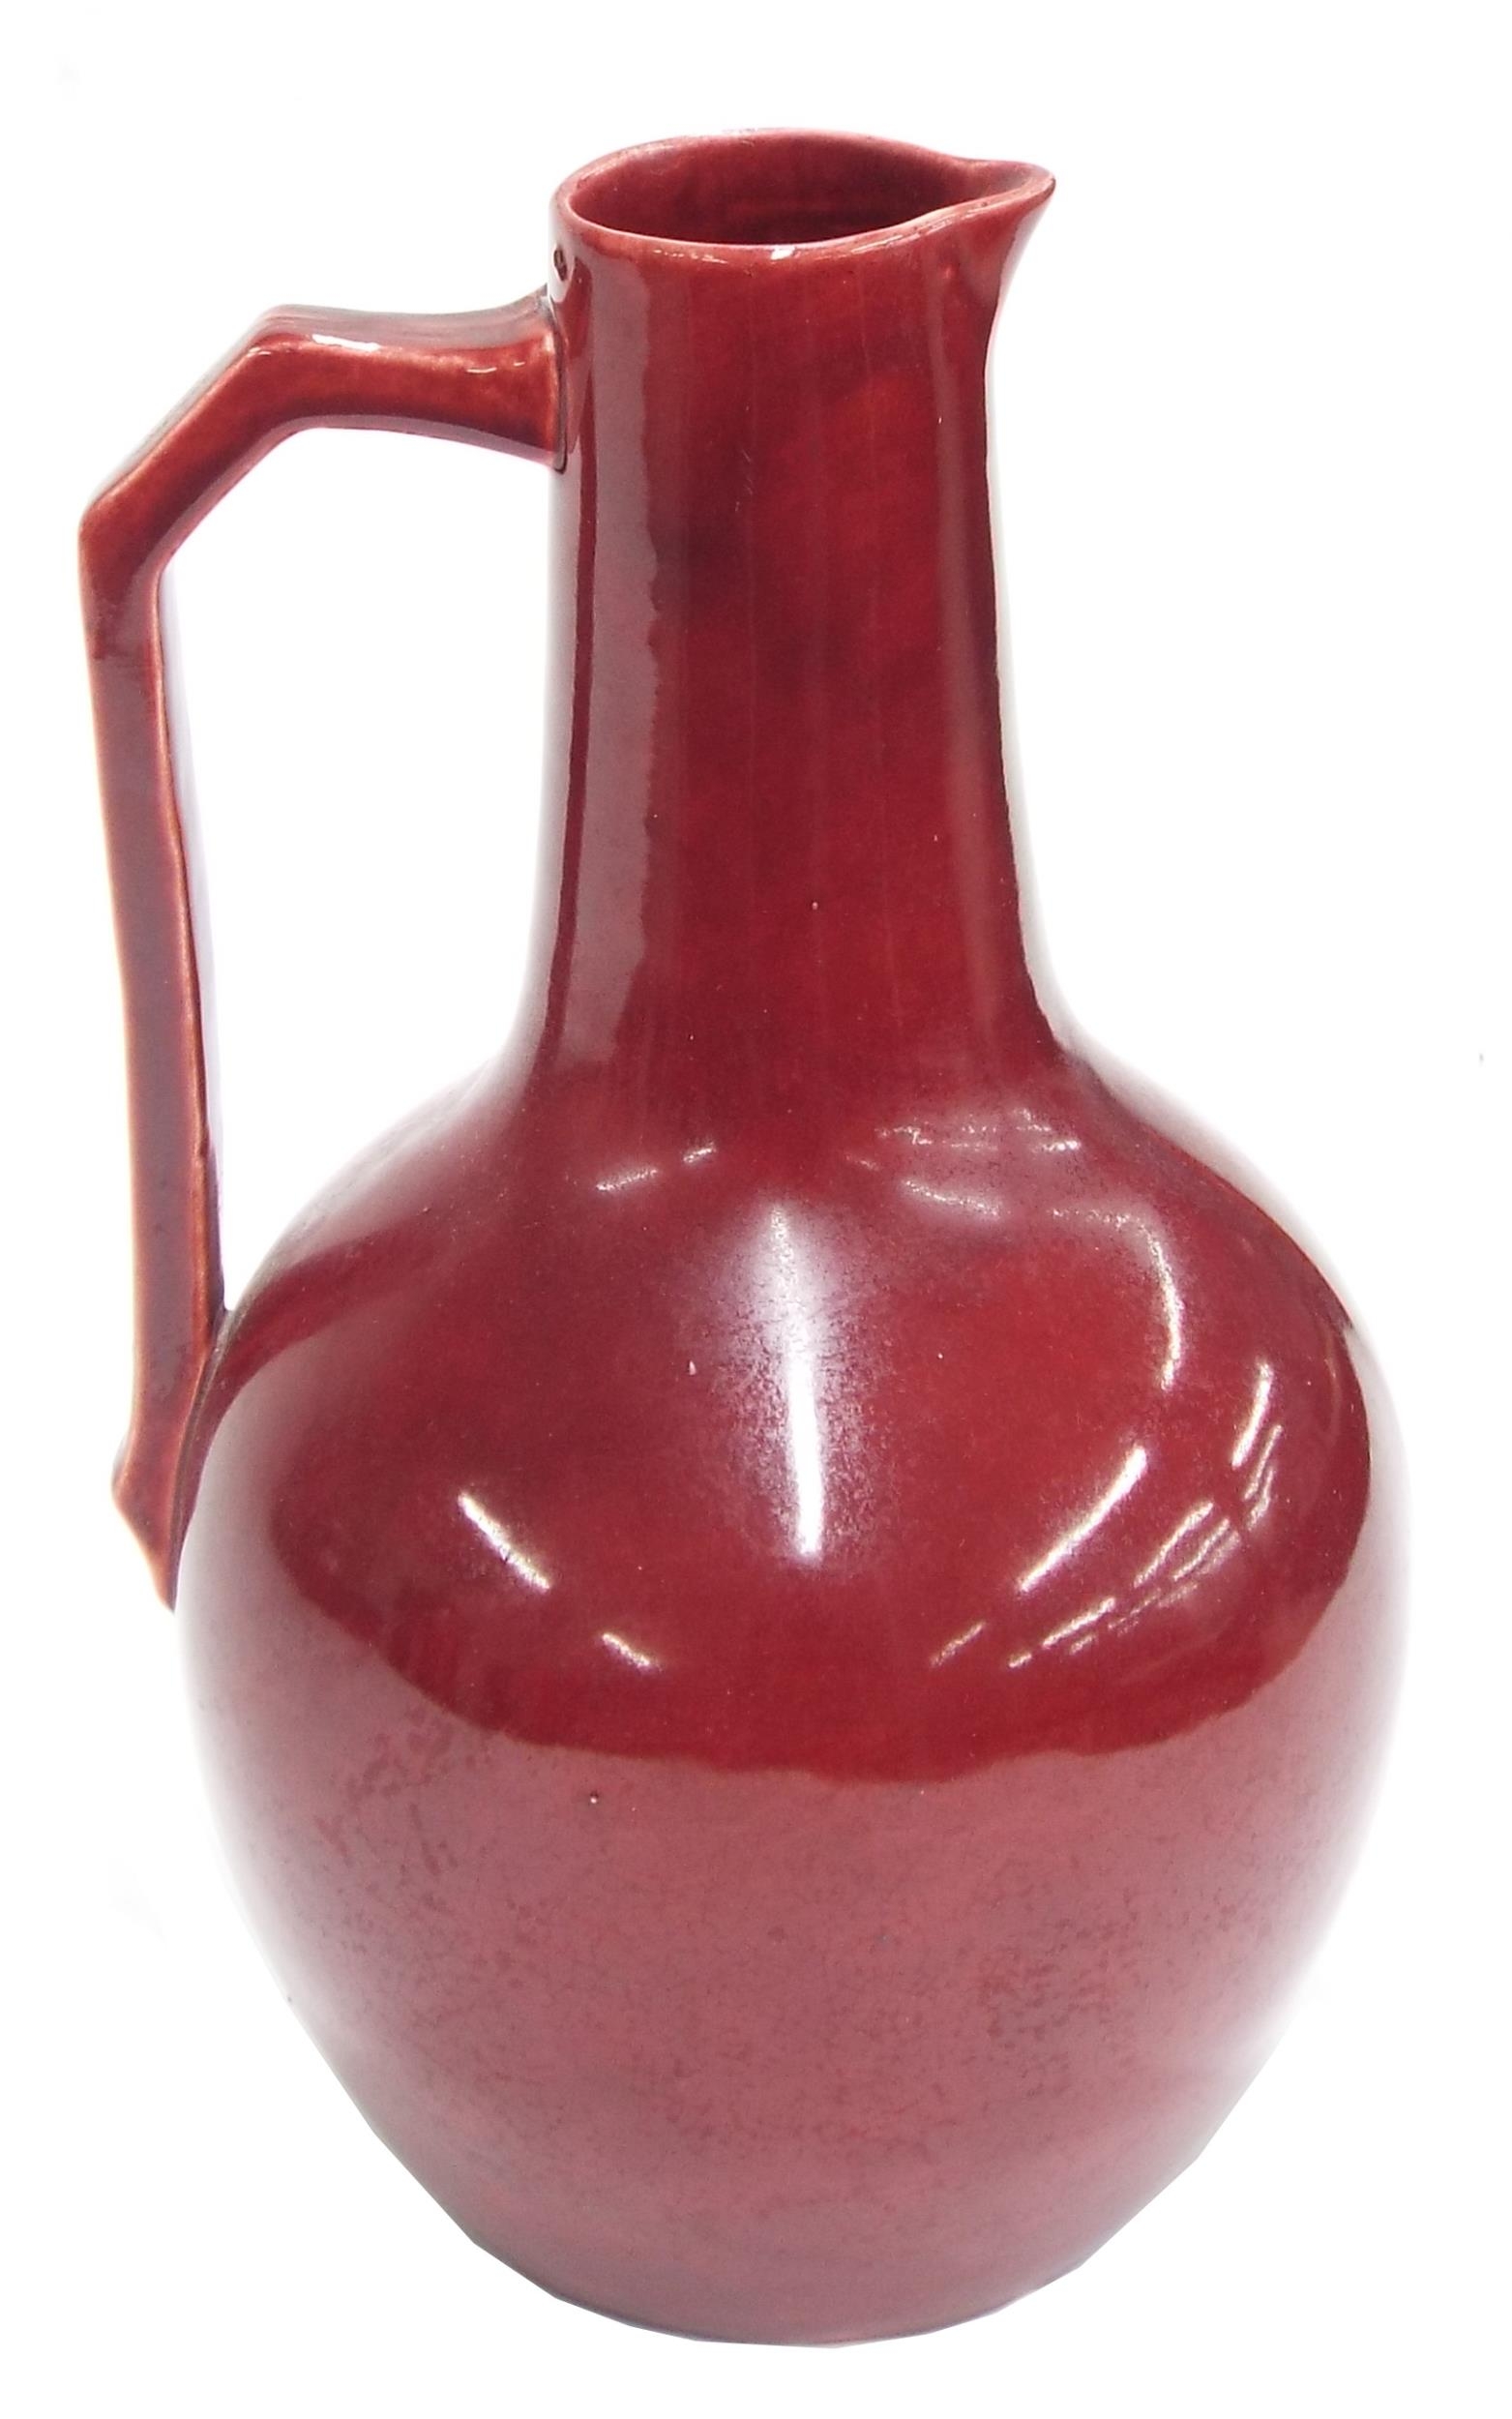 Christopher Dresser design for Lear Pottery jug, decorated in a deep ruby red glaze, inscribed